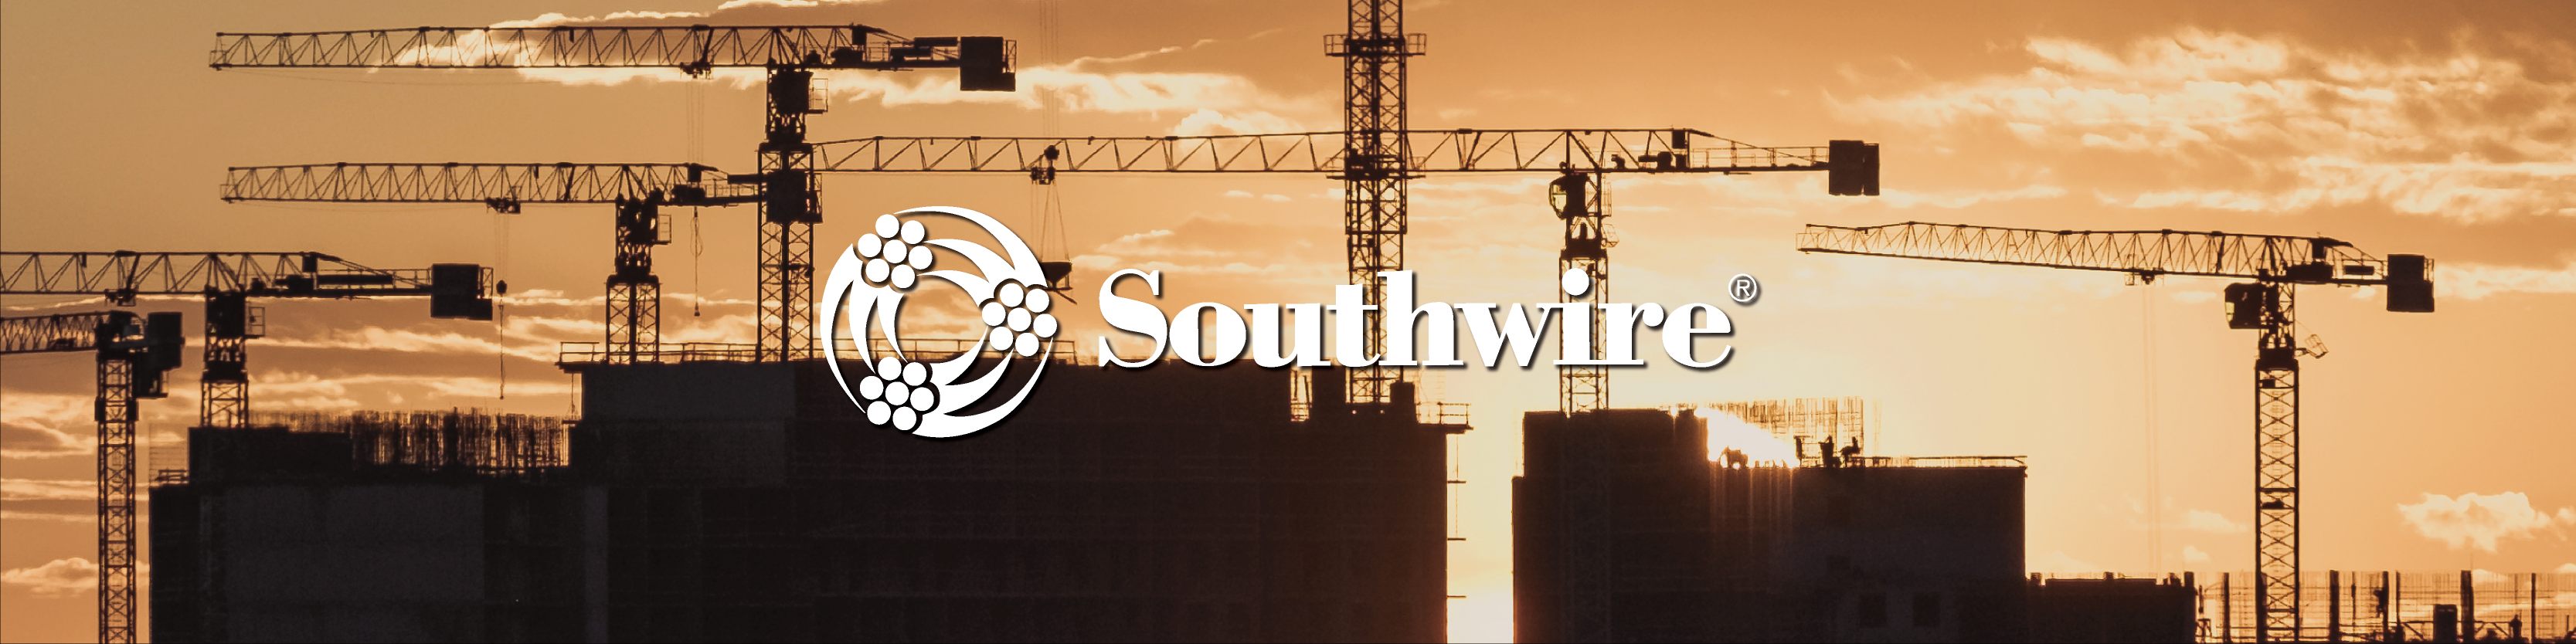 Featured Suppliers Banner Image - Southwire